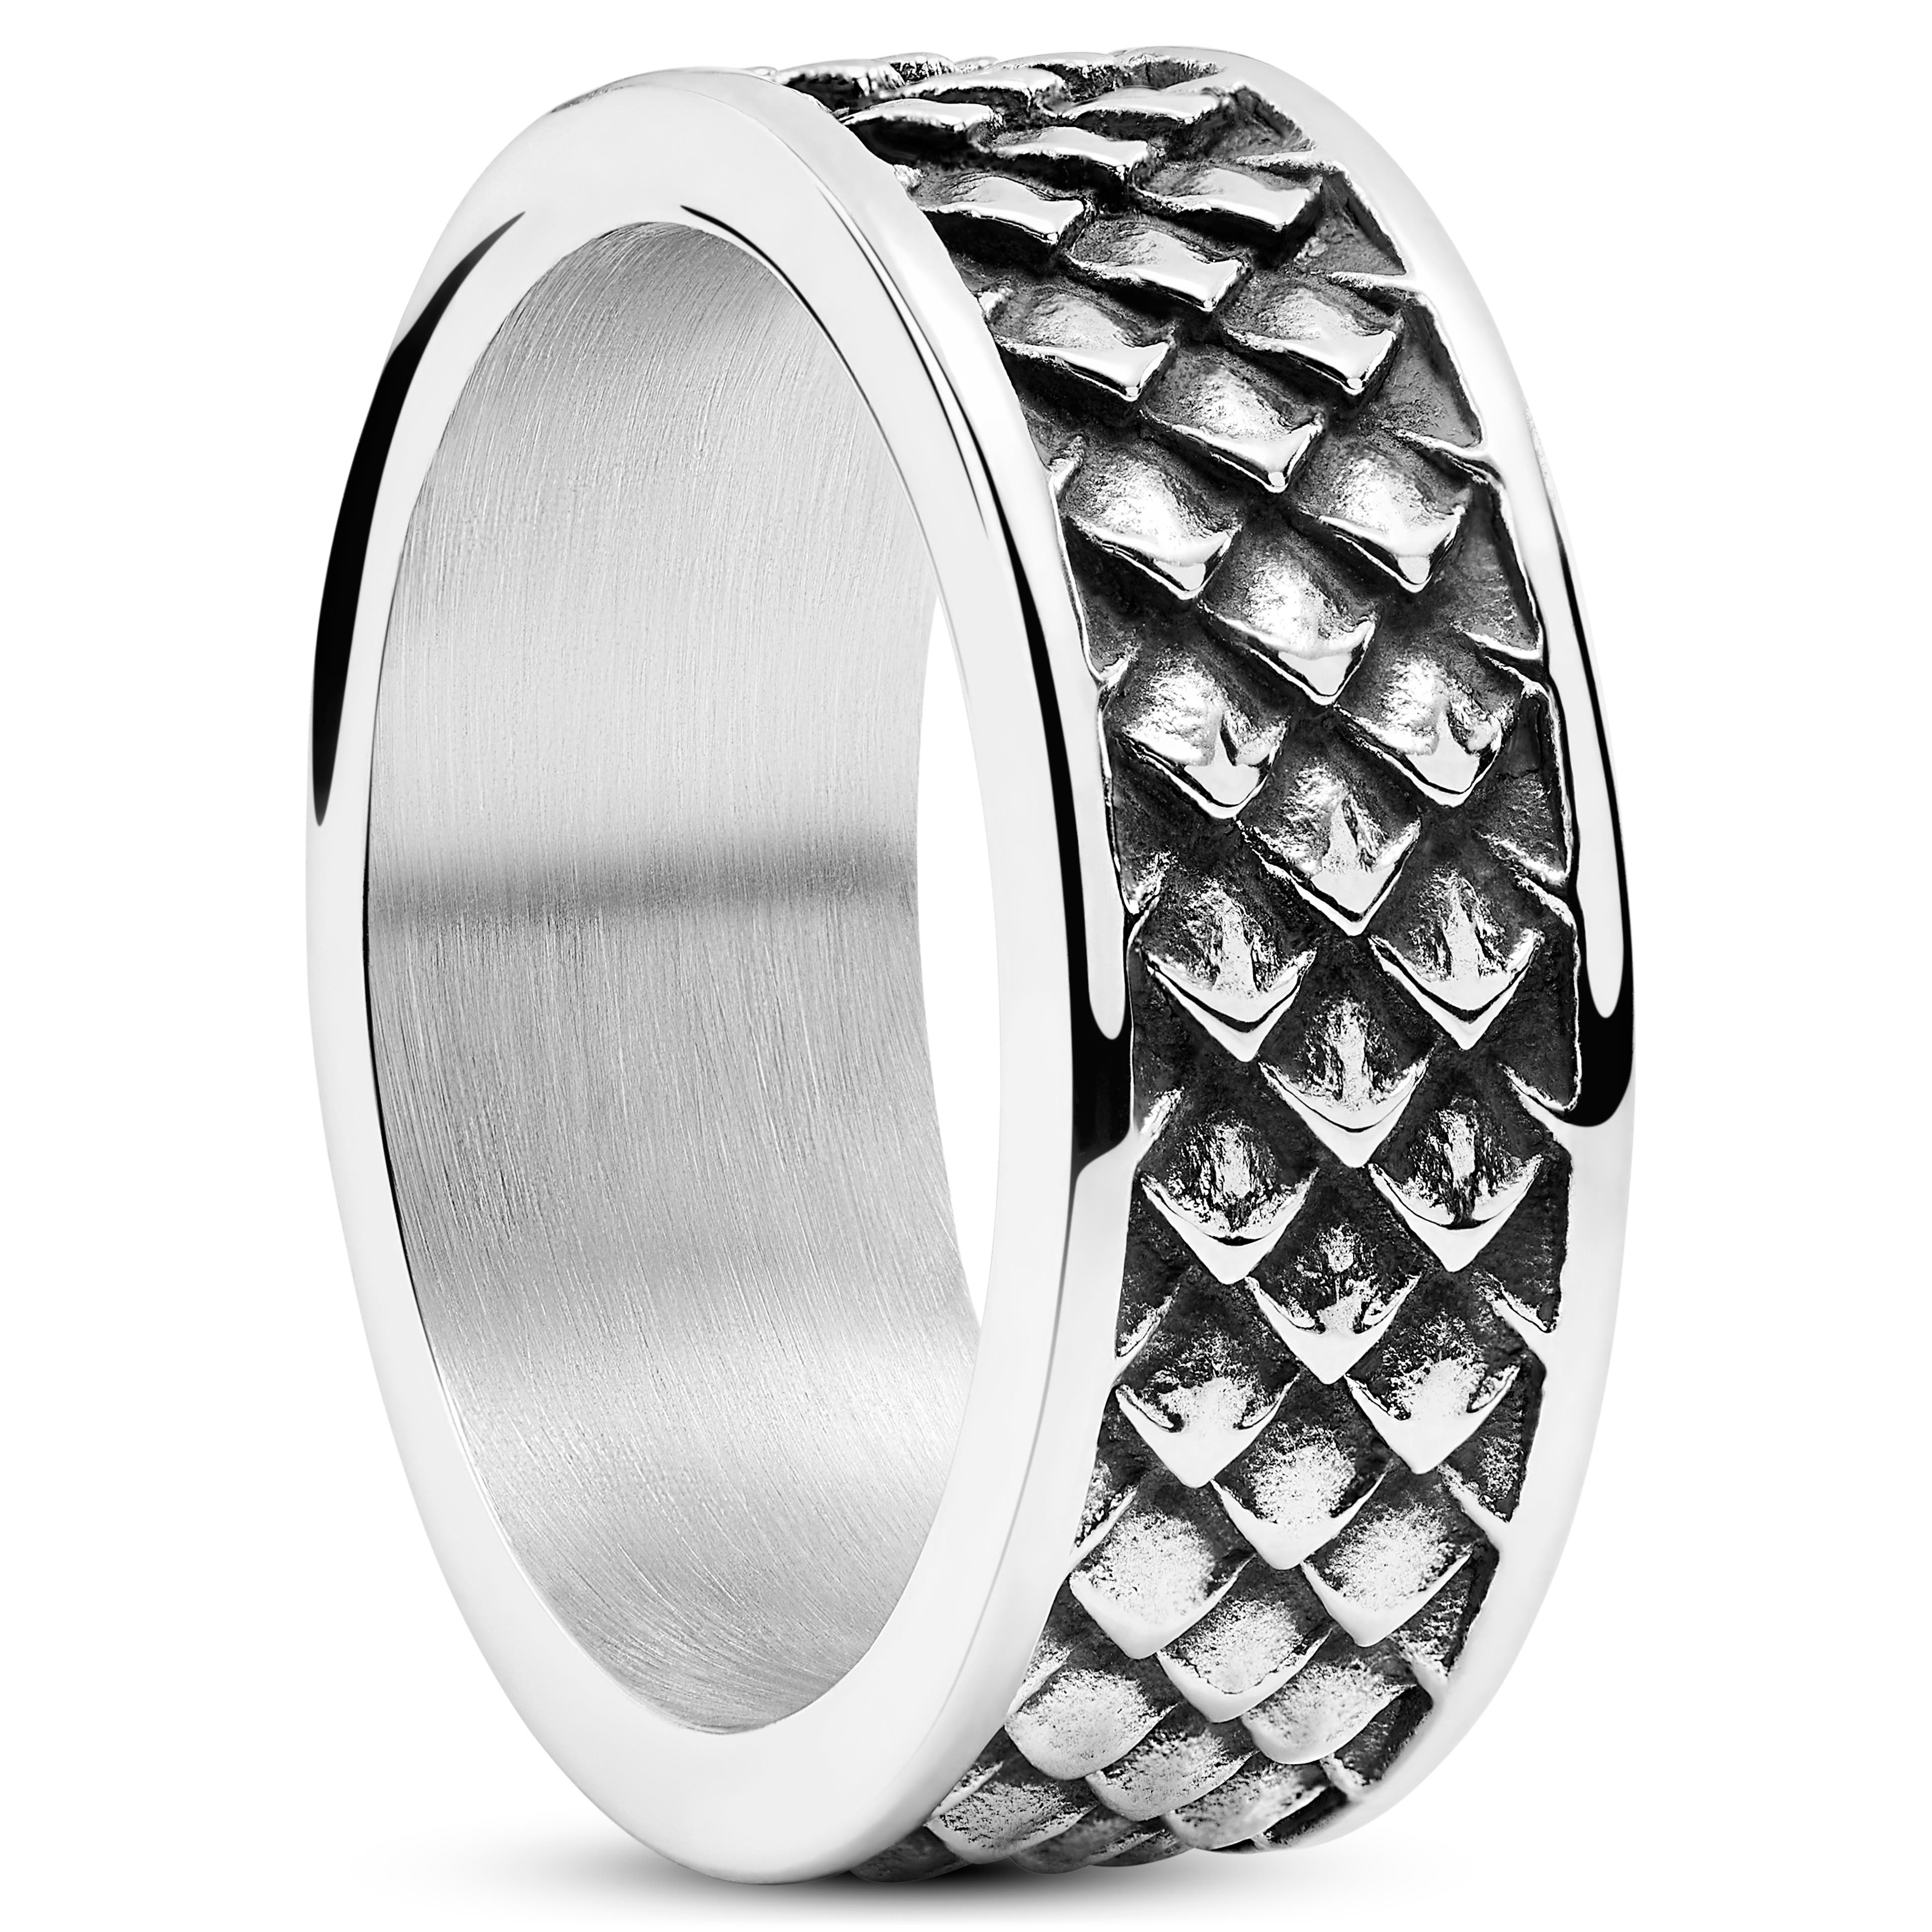 8 mm Silver-Tone Stainless Steel Dragon Scale Pattern Ring